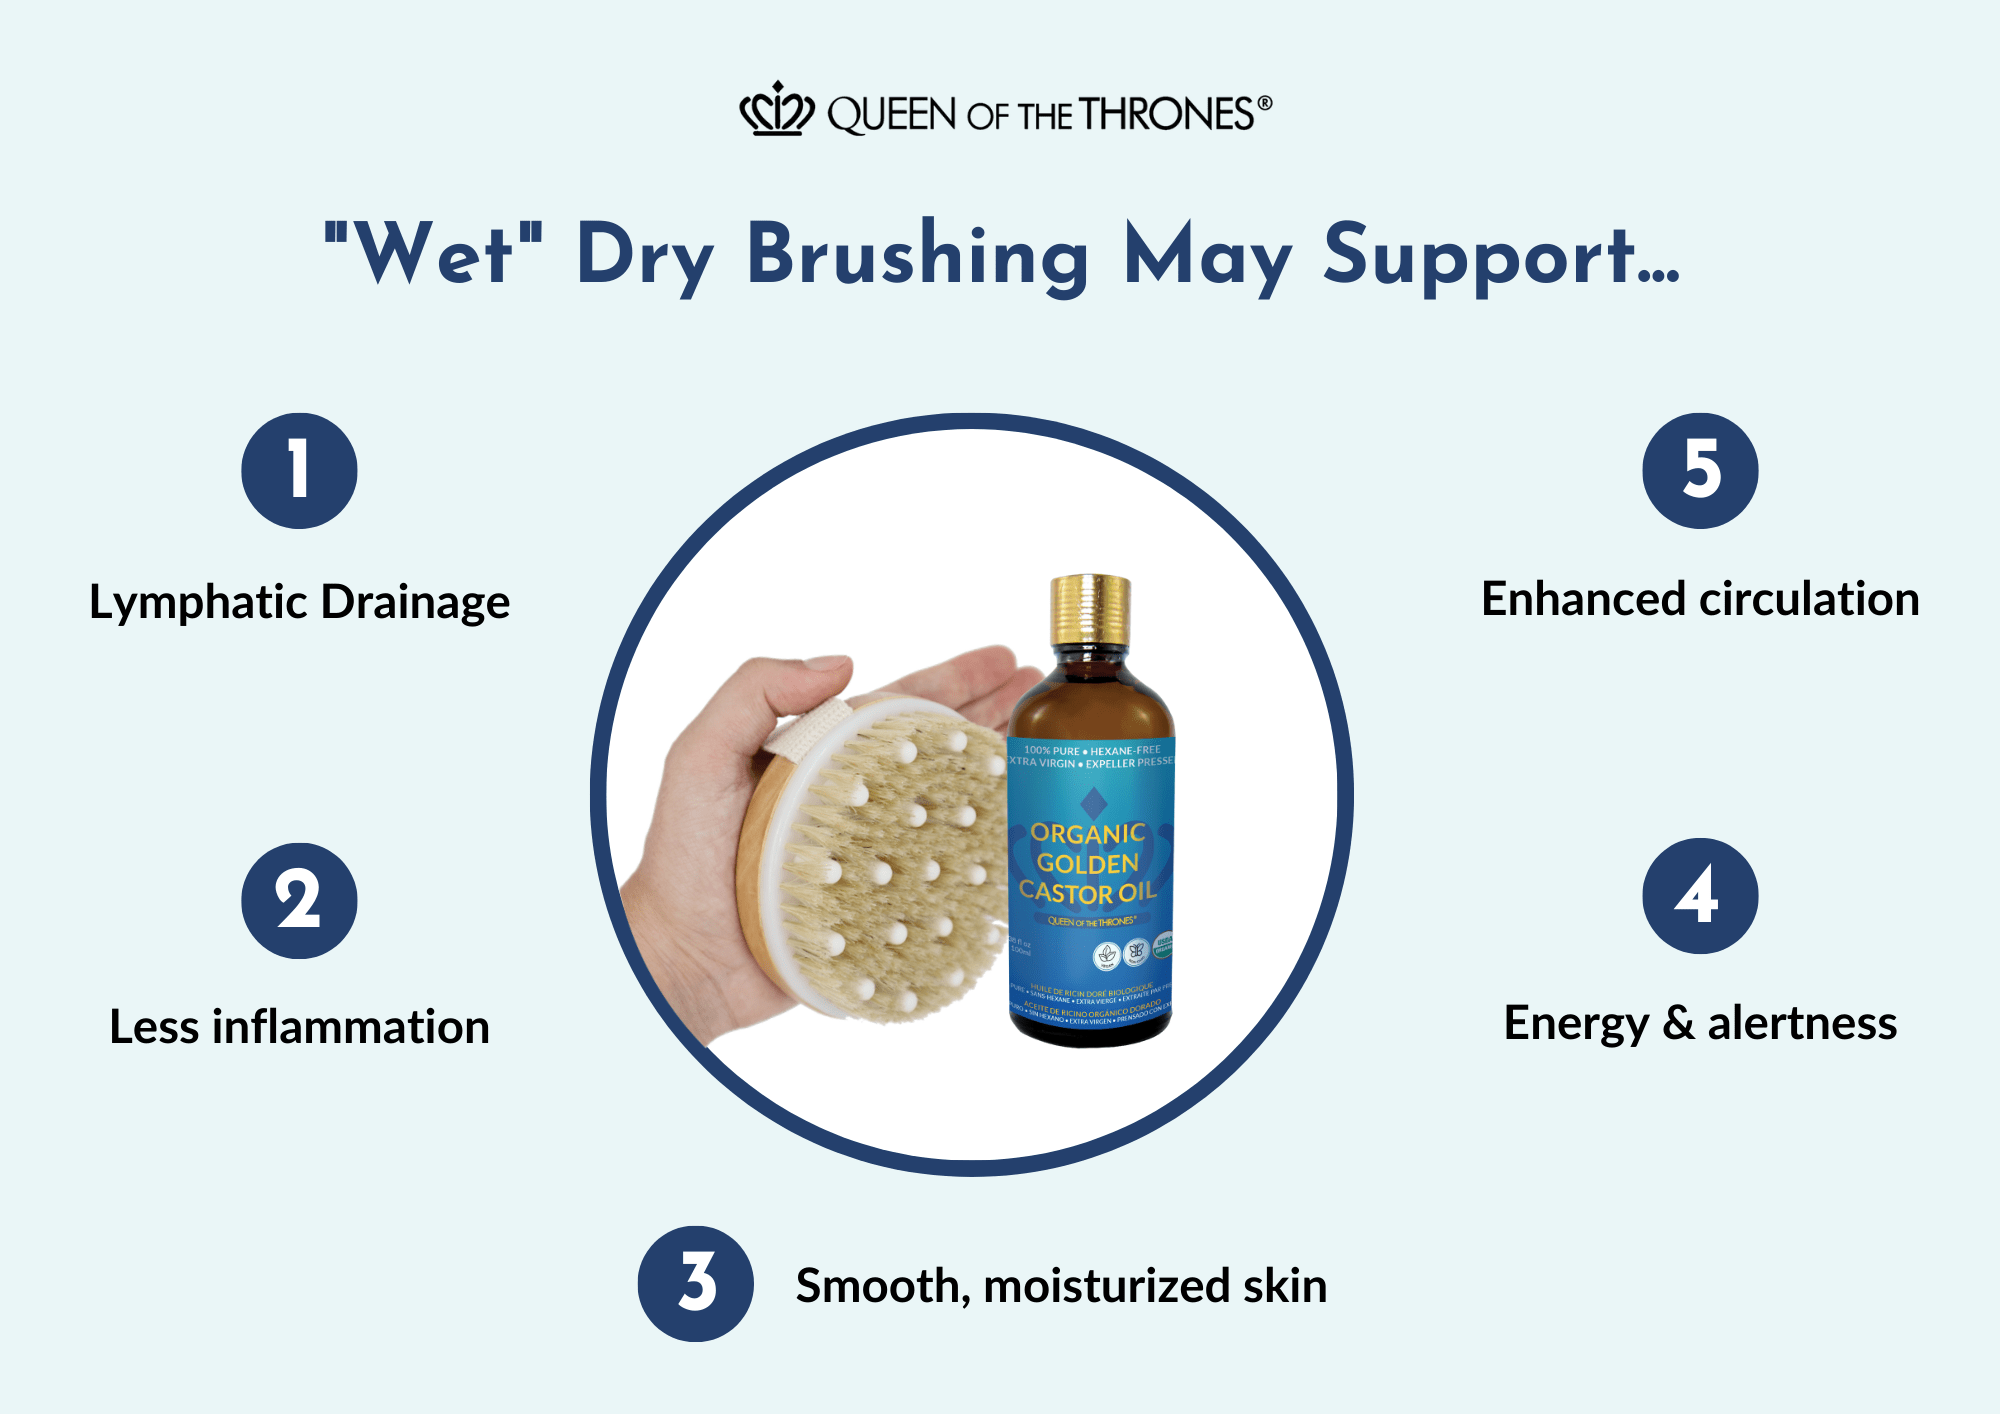 Wet dry brushing supports lymphatic drainage by Queen of the Thrones